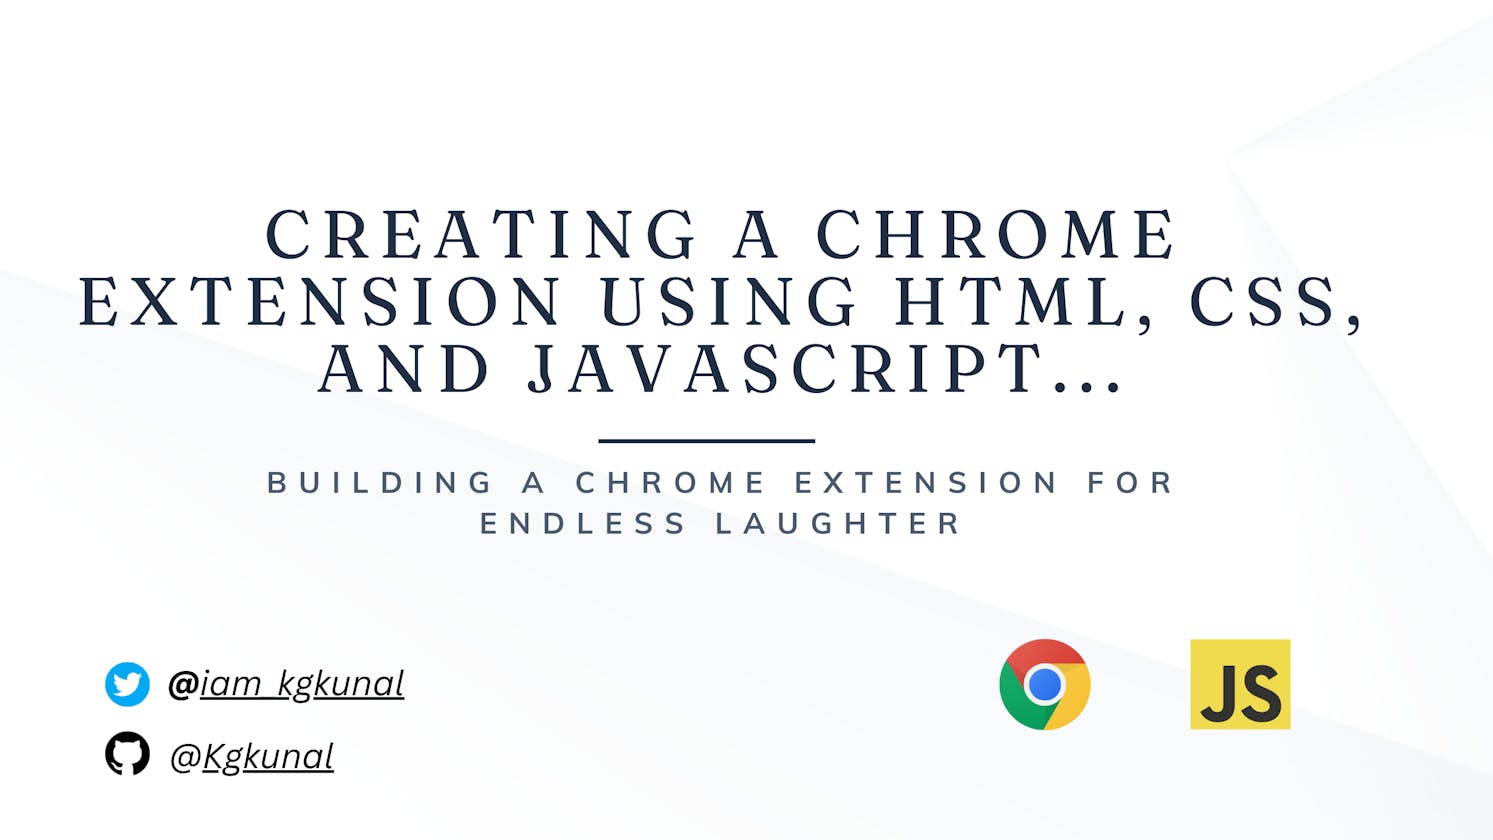 Building a Chrome Extension for Endless Laughter